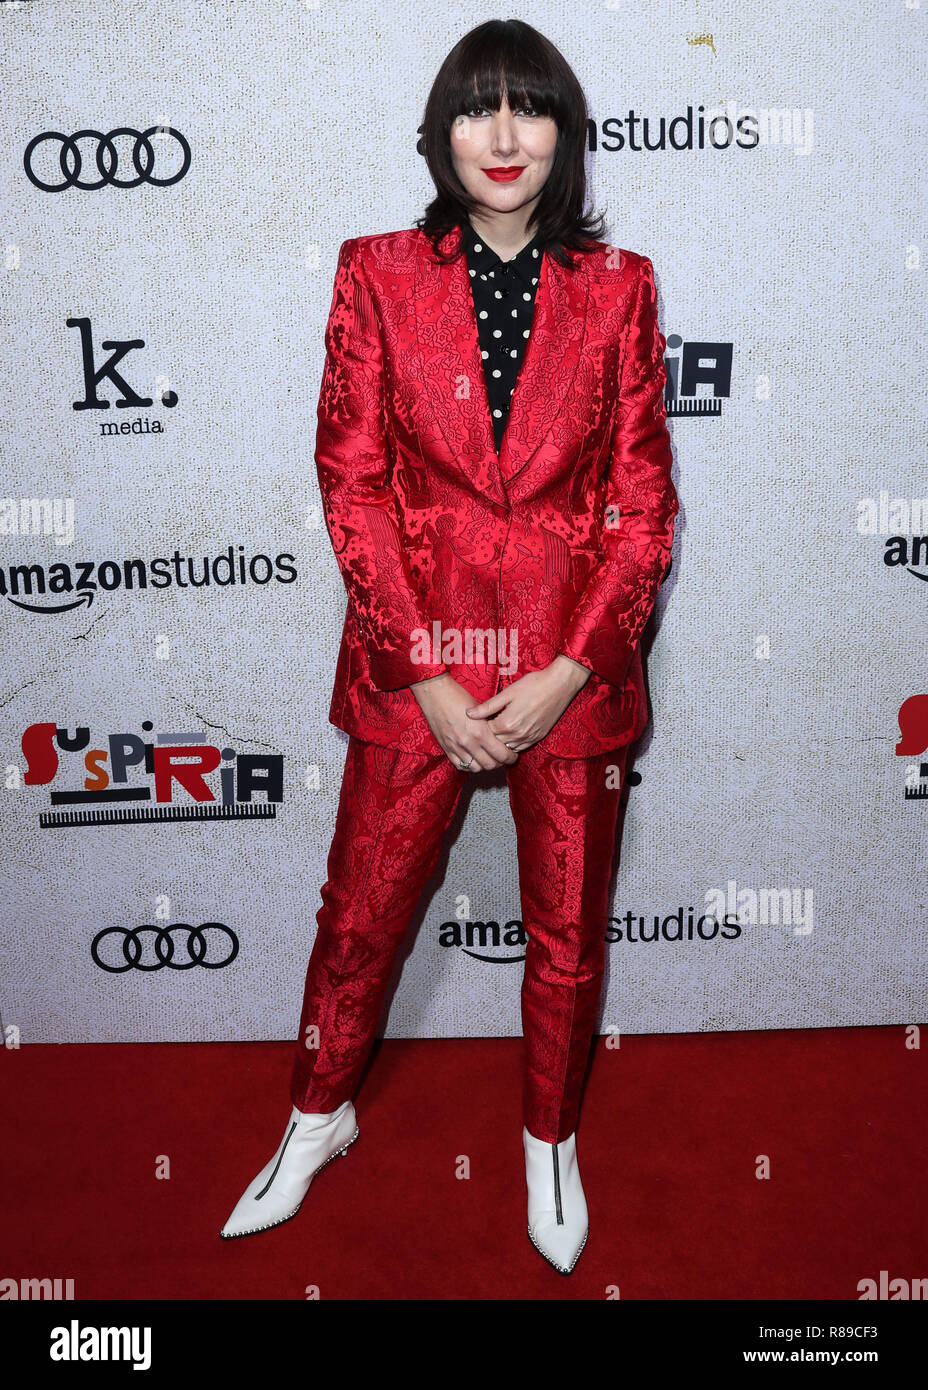 HOLLYWOOD, LOS ANGELES, CA, USA - OCTOBER 24: Karen O at the Los Angeles Premiere Of Amazon Studio's 'Suspiria' held at the ArcLight Cinerama Dome on October 24, 2018 in Hollywood, Los Angeles, California, United States. (Photo by Xavier Collin/Image Press Agency) Stock Photo